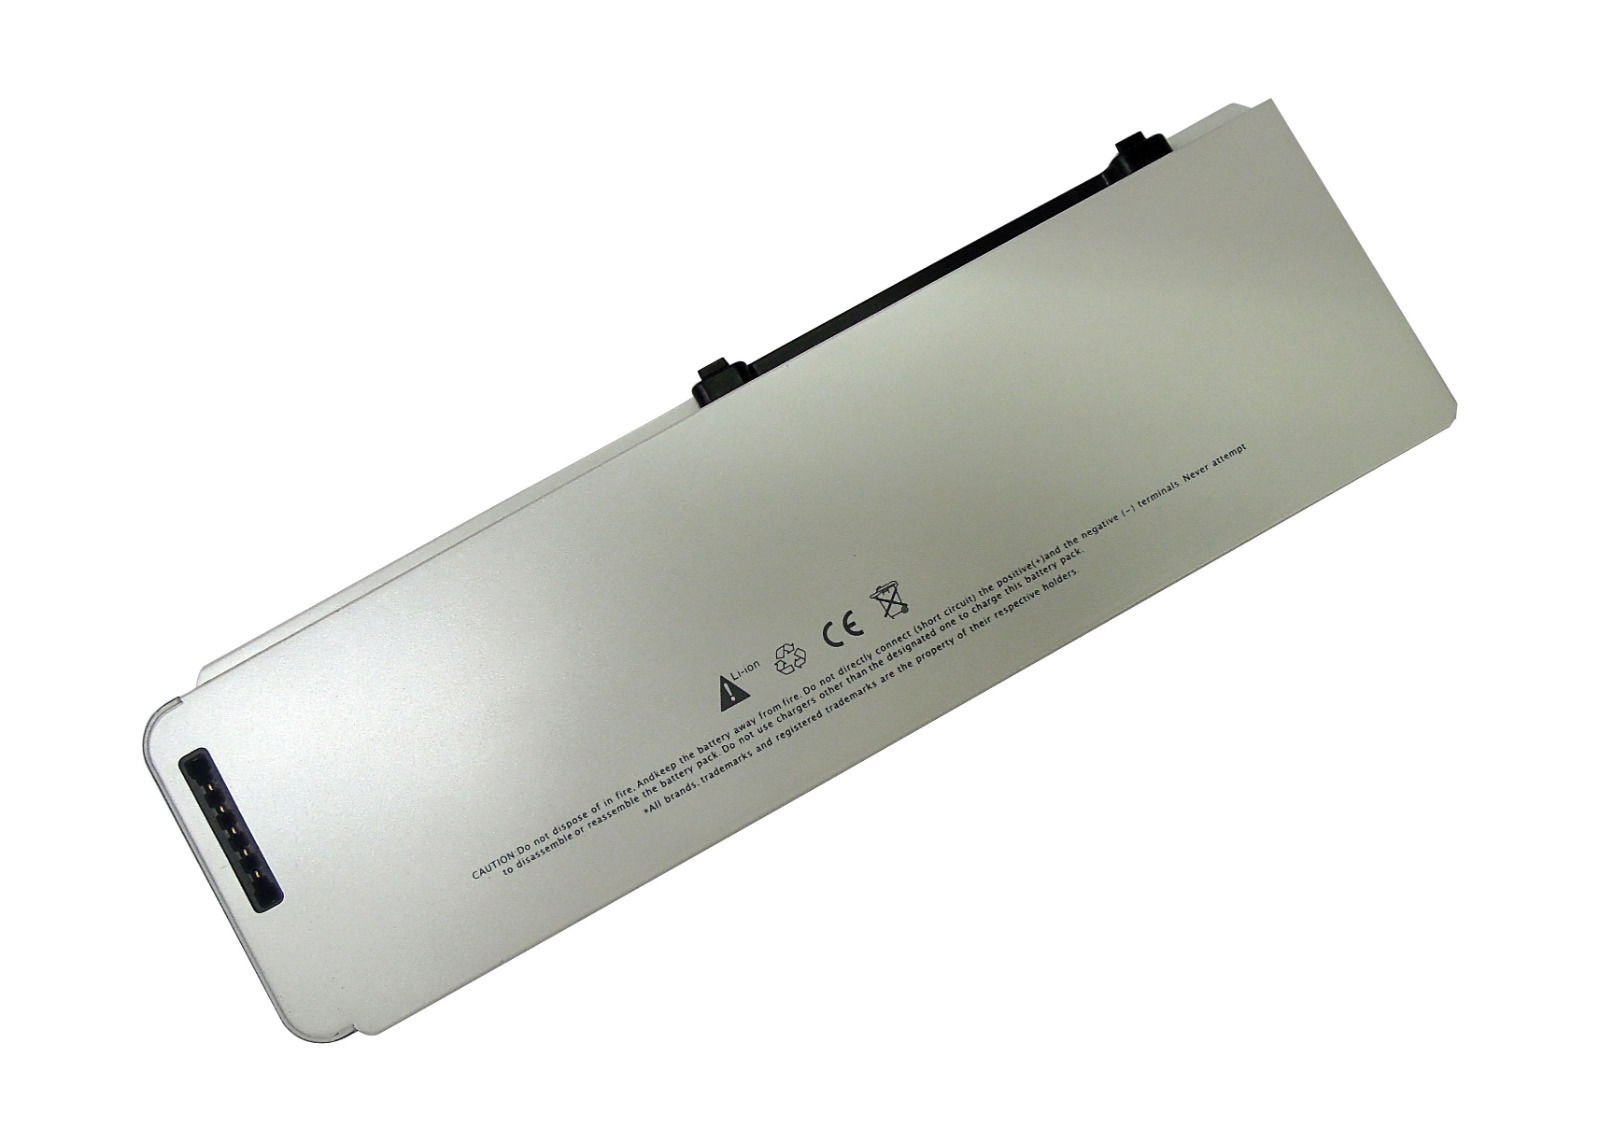 macbook pro 15 inch early 2011 battery replacement